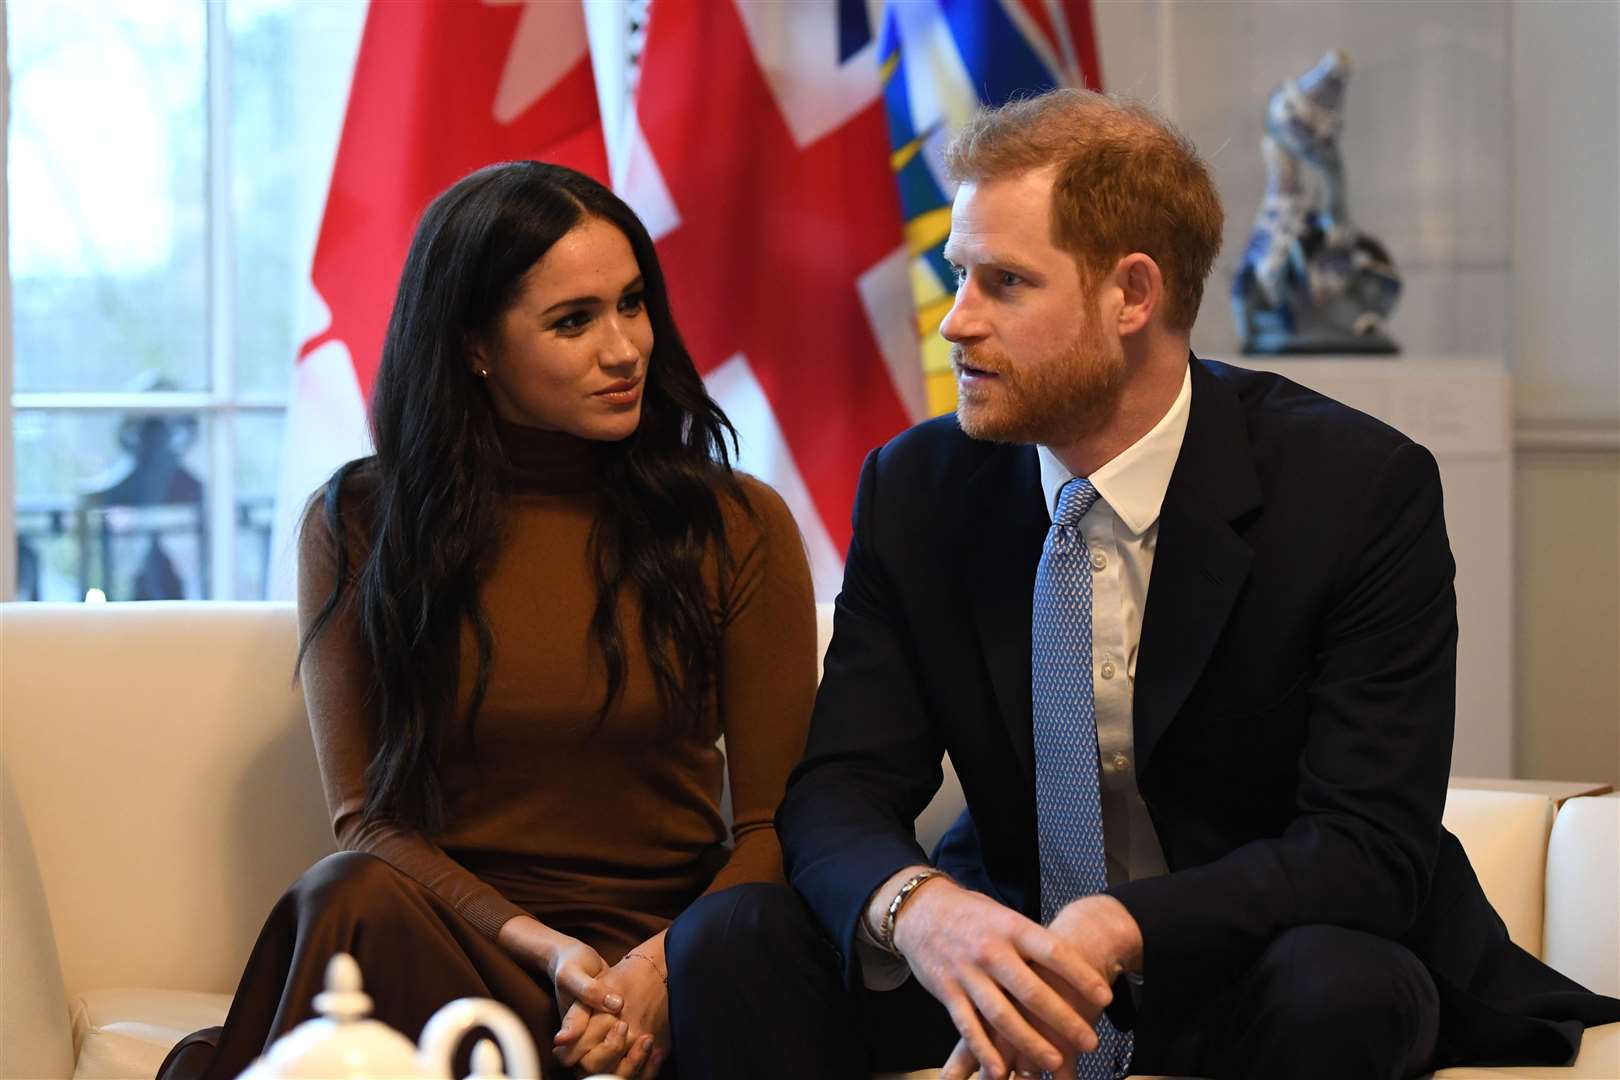 The couple during their visit to Canada House, central London, in January 2020 (Daniel Leal-Olivas/PA)